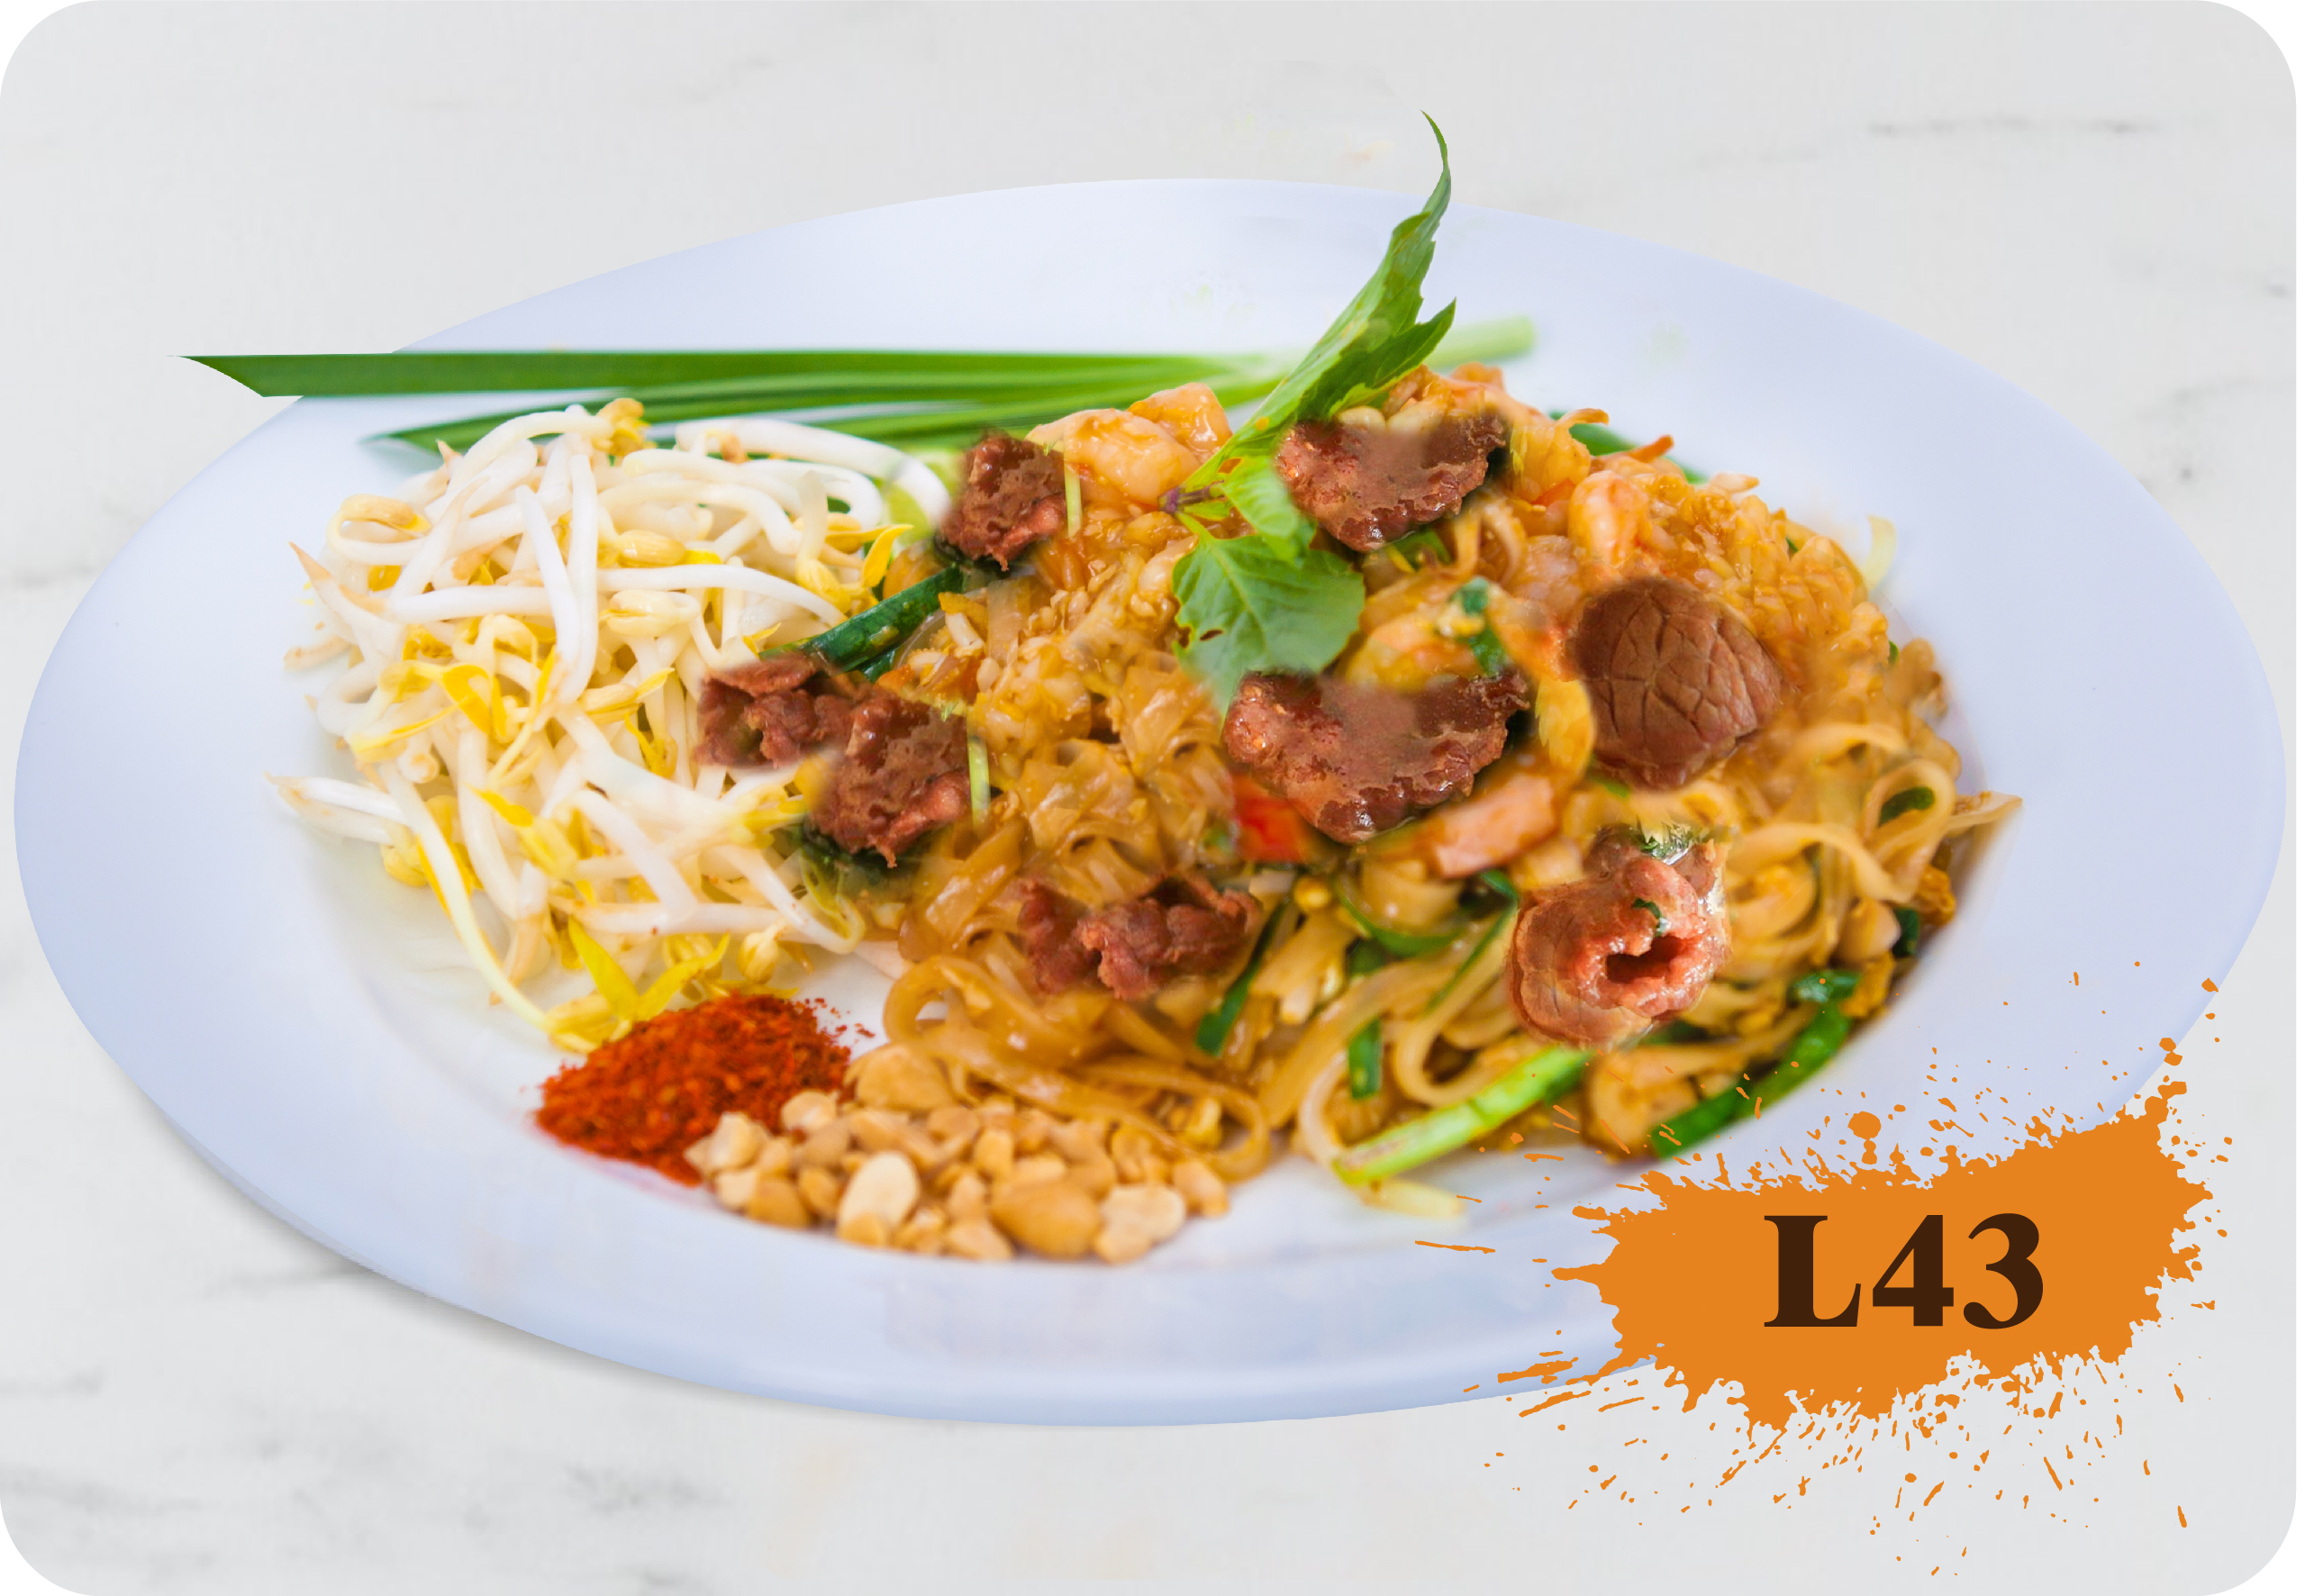 02.Pad Thai With Beef